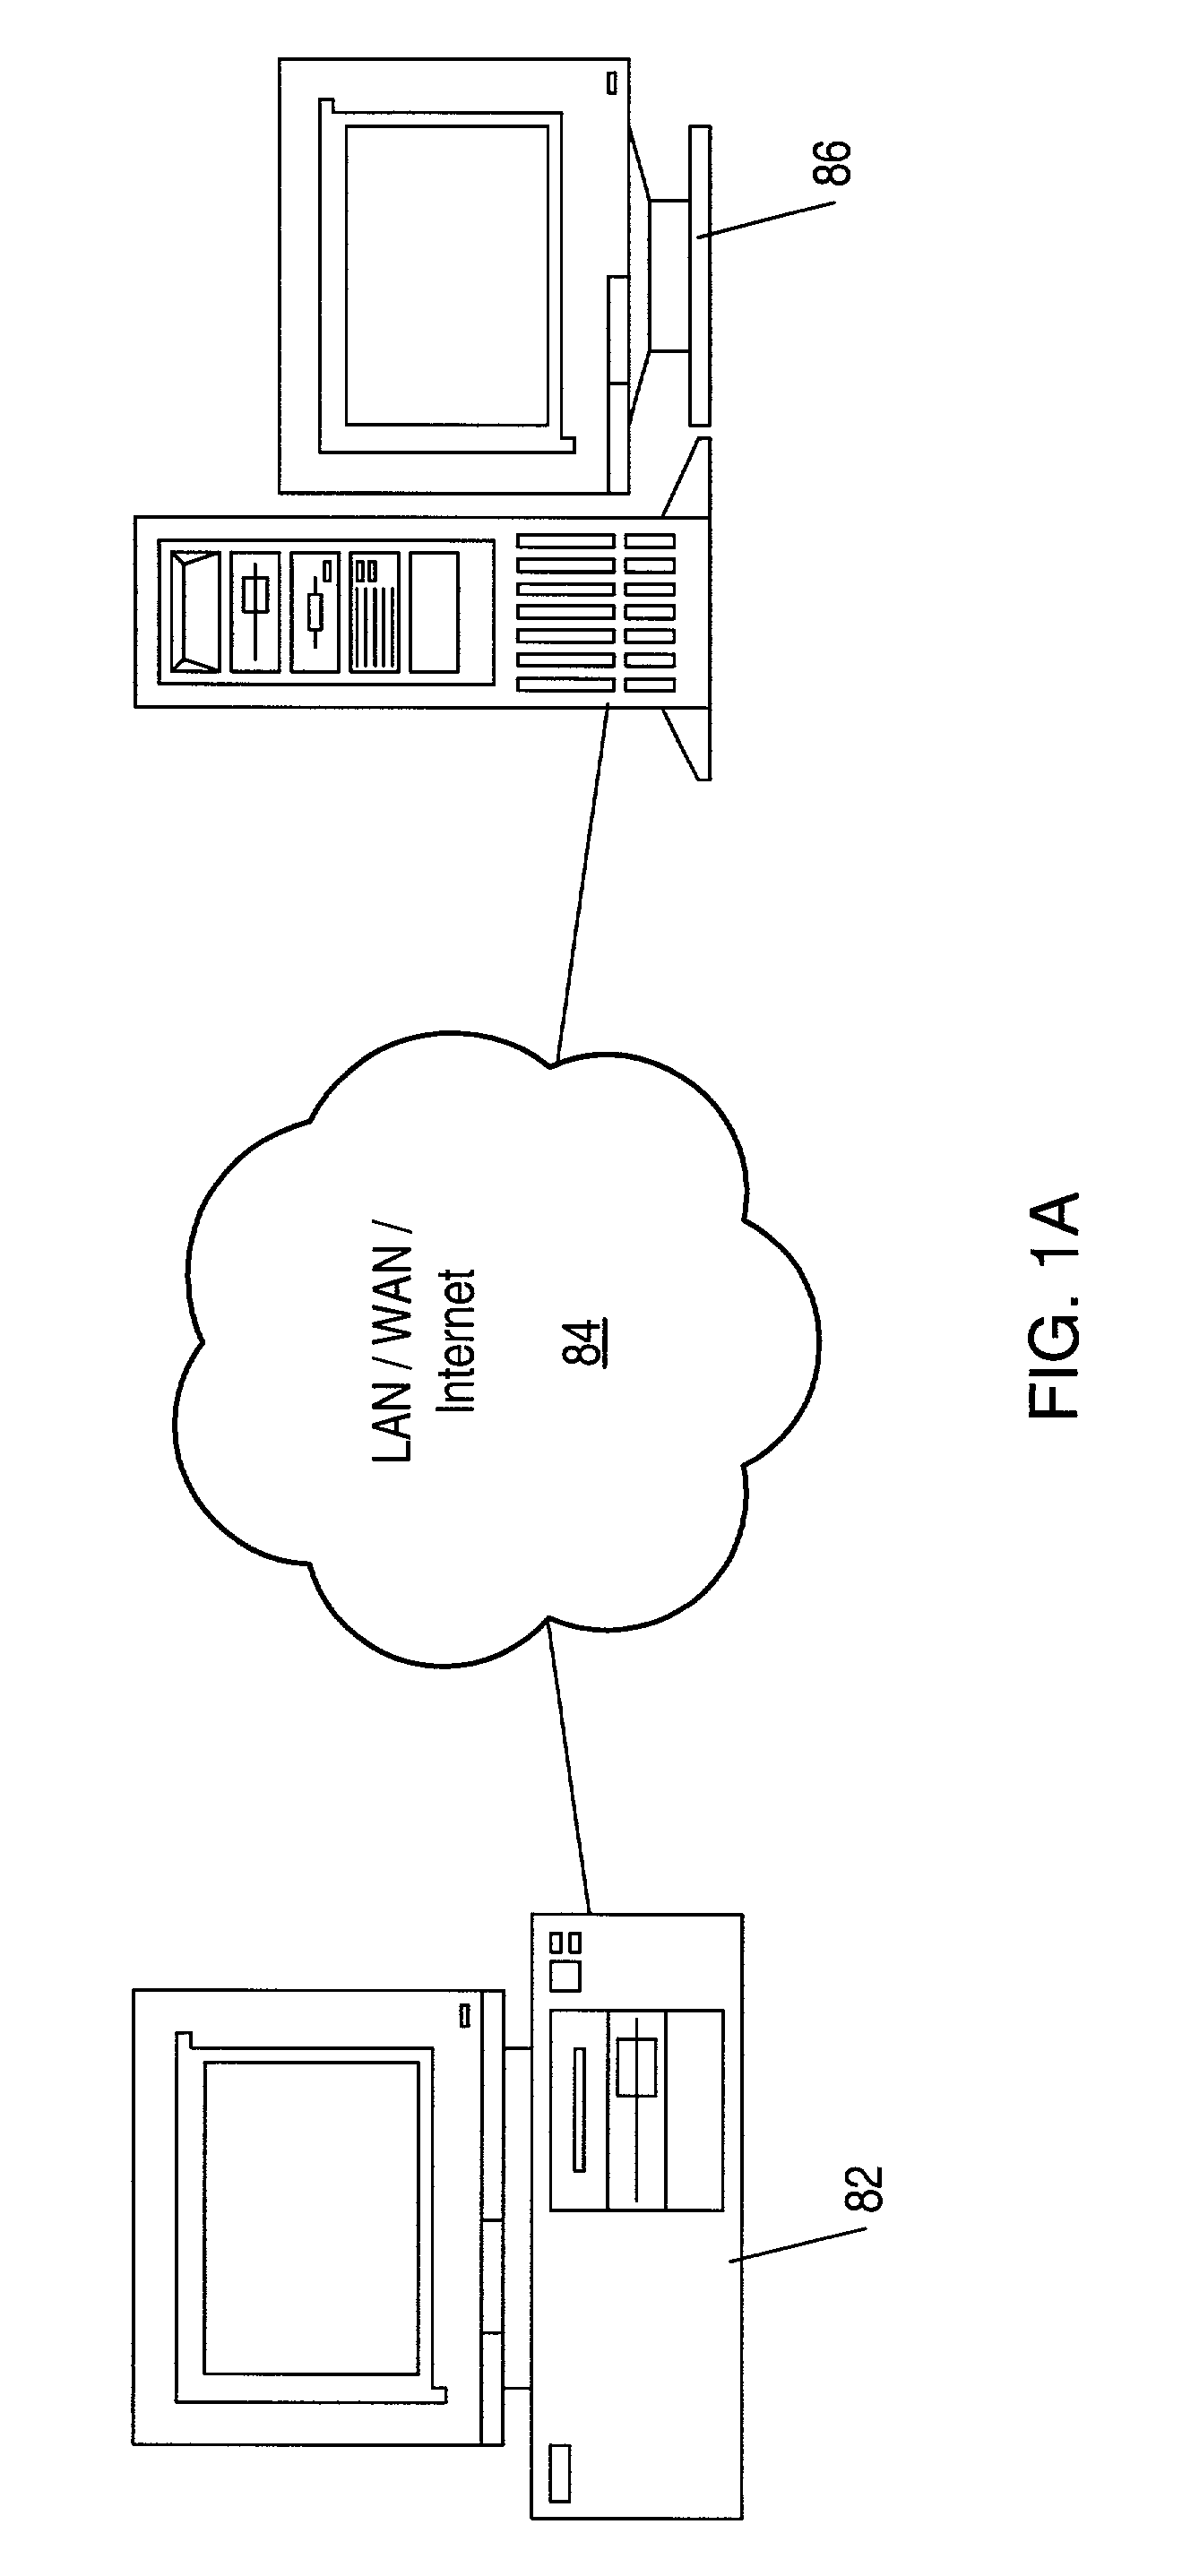 Network system including data socket components for accessing internet semaphores